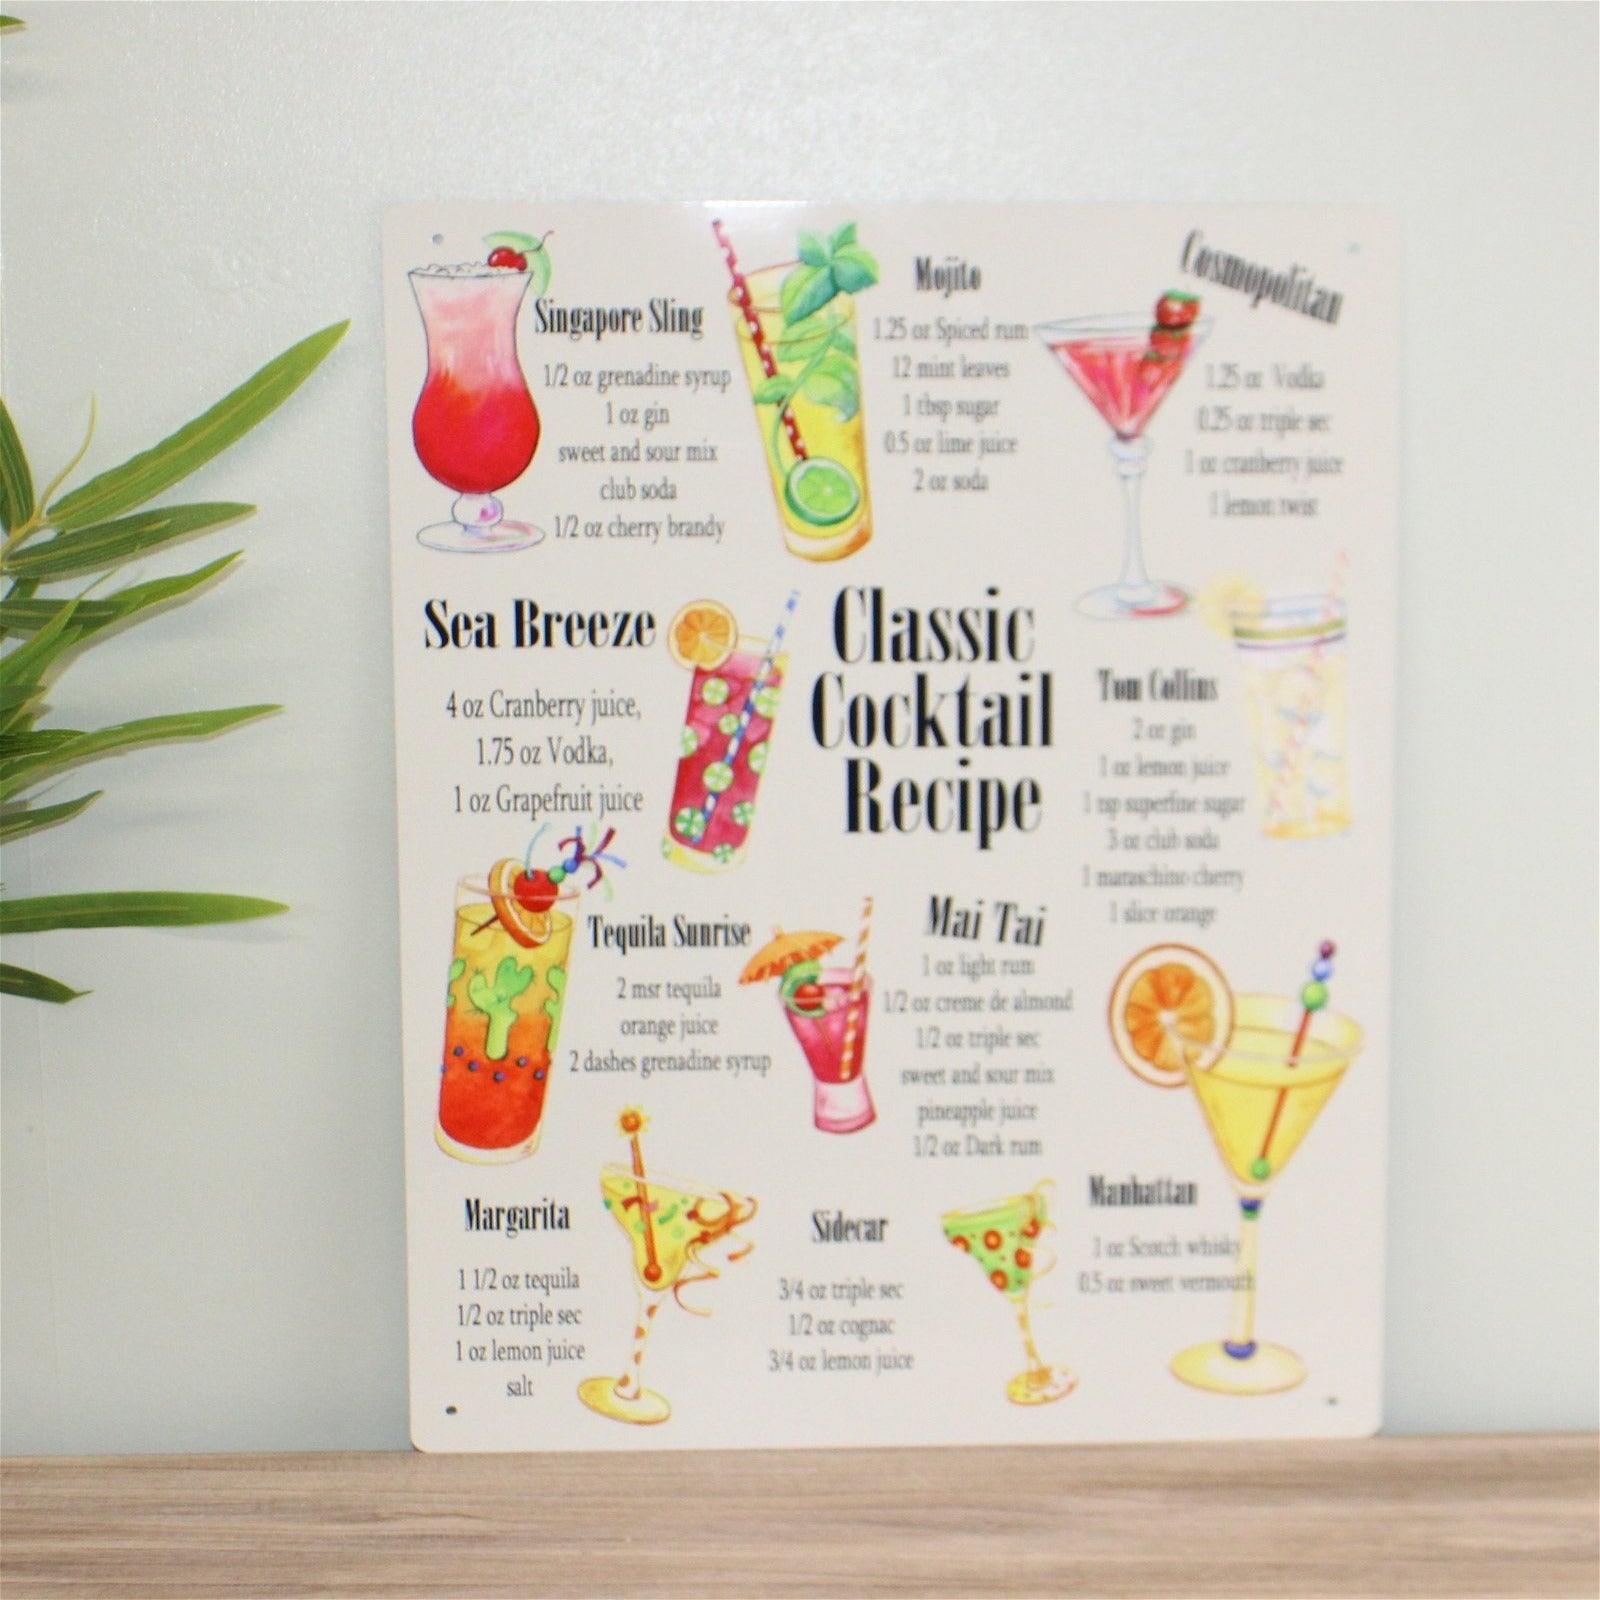 Vintage Metal Sign - Classic Cocktail Recipes